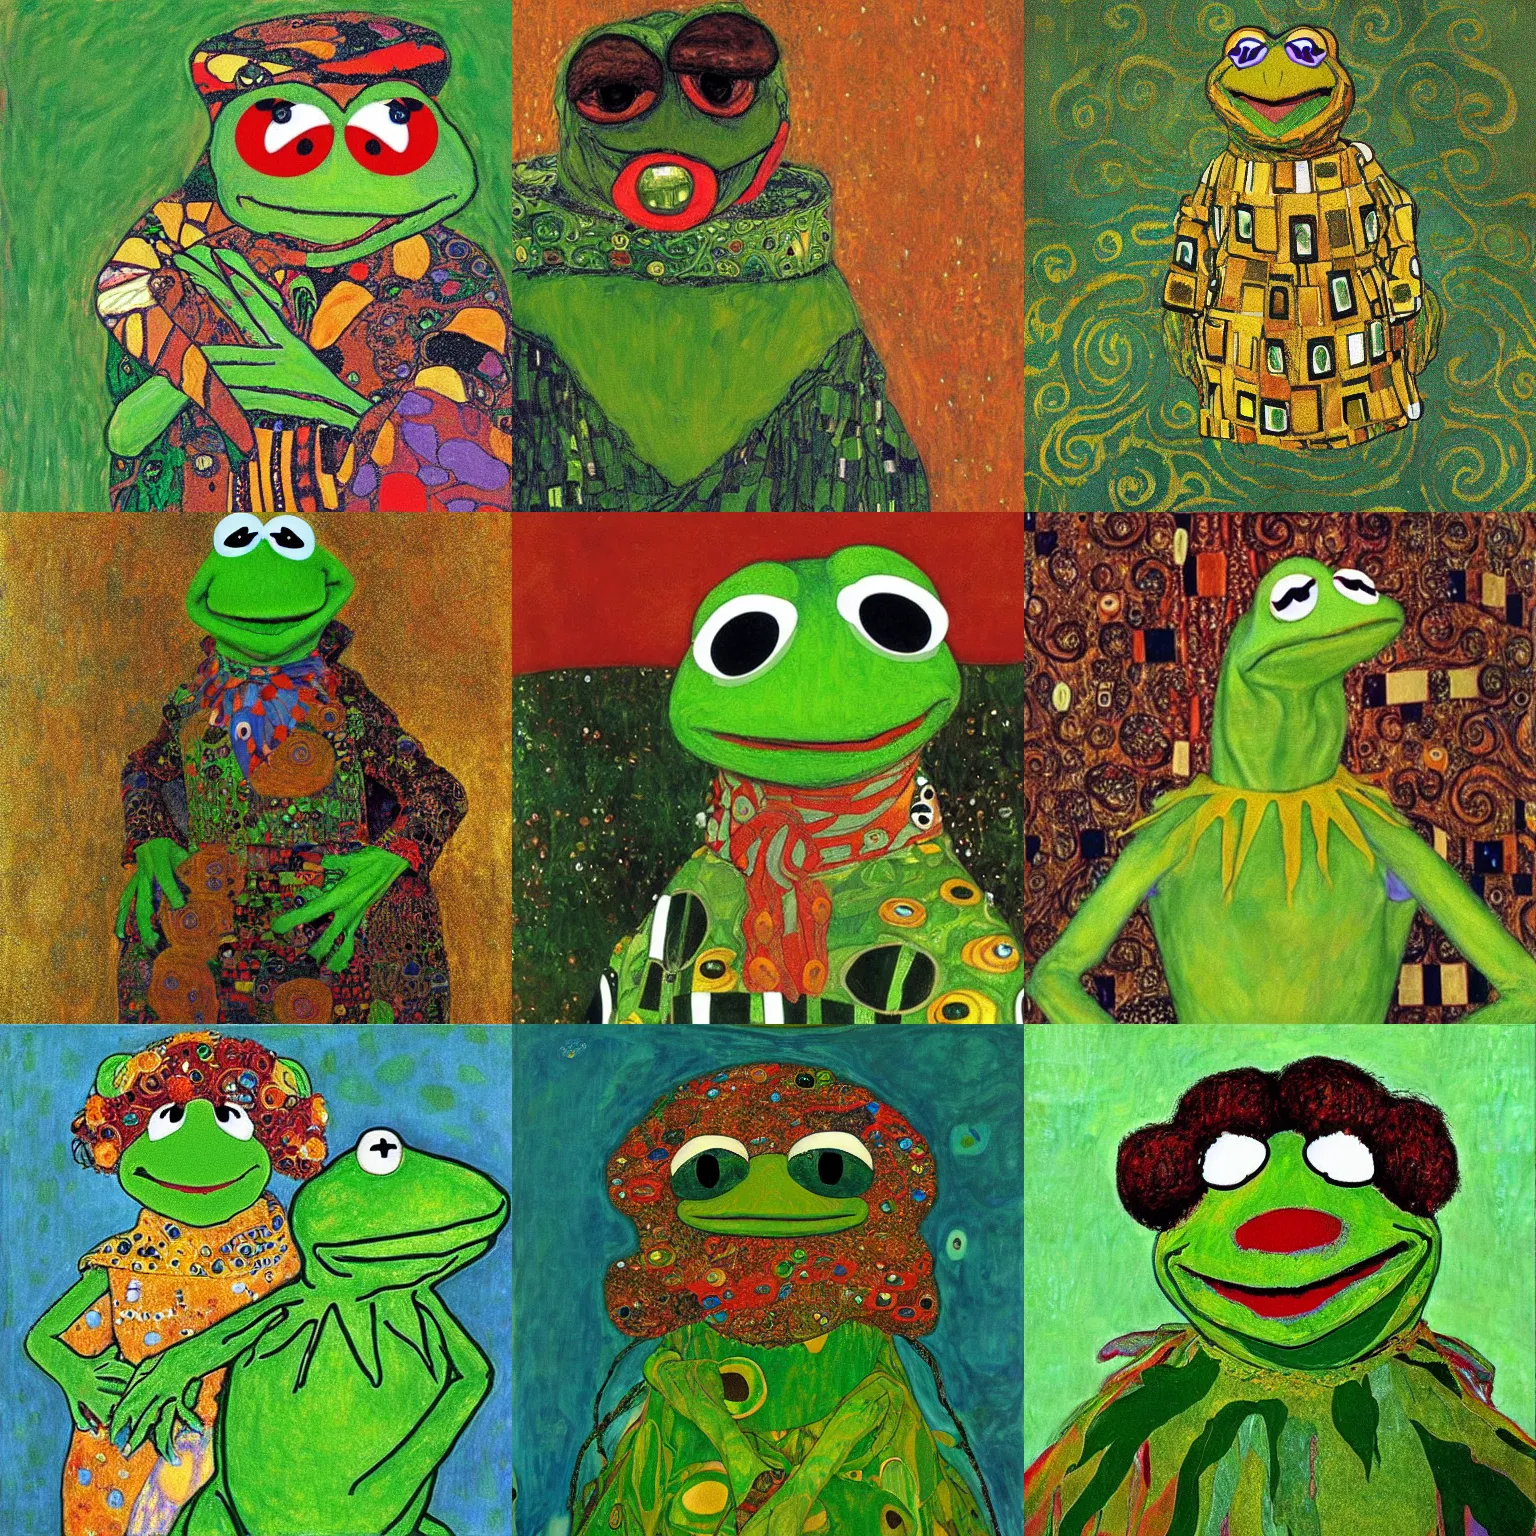 Prompt: A portrait of Kermit the Frog painted by Gustav Klimt